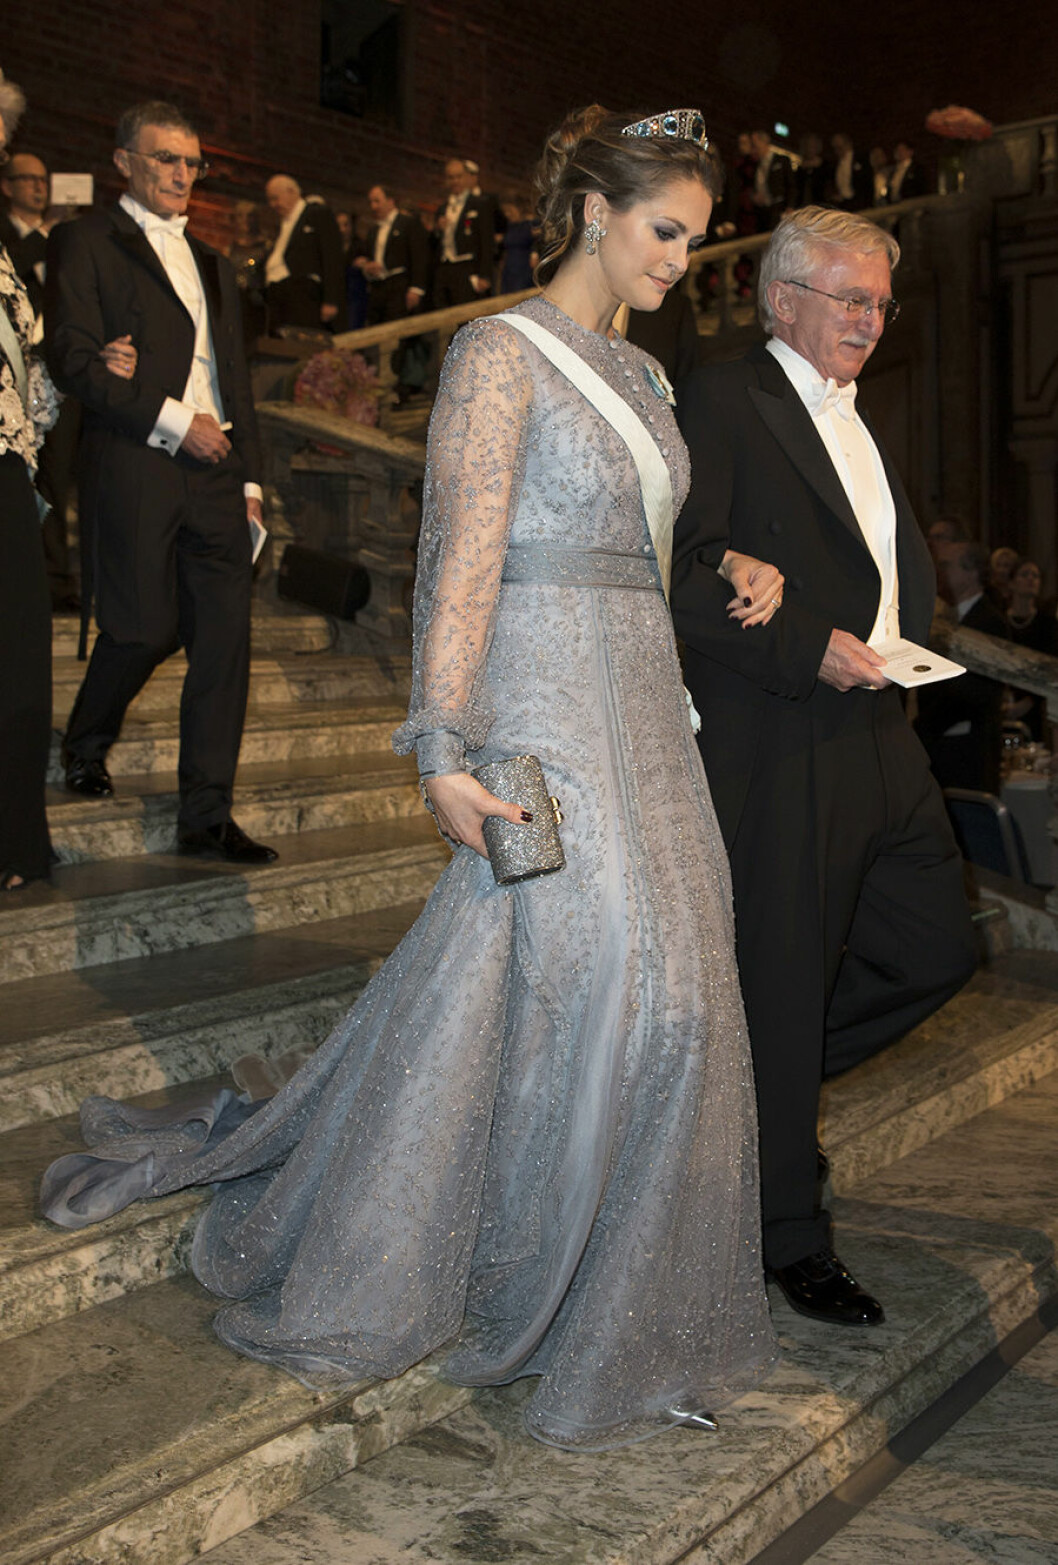 STOCKHOLM 2015-12-10. The Nobel Prize 2015. The Nobel Banquet after the Prize Ceremony, in the Blue Hall of the Stockholm City Hall. Picture shows: Princess Madeleine and Paul Modrich COPYRIGHT STELLA PICTURES